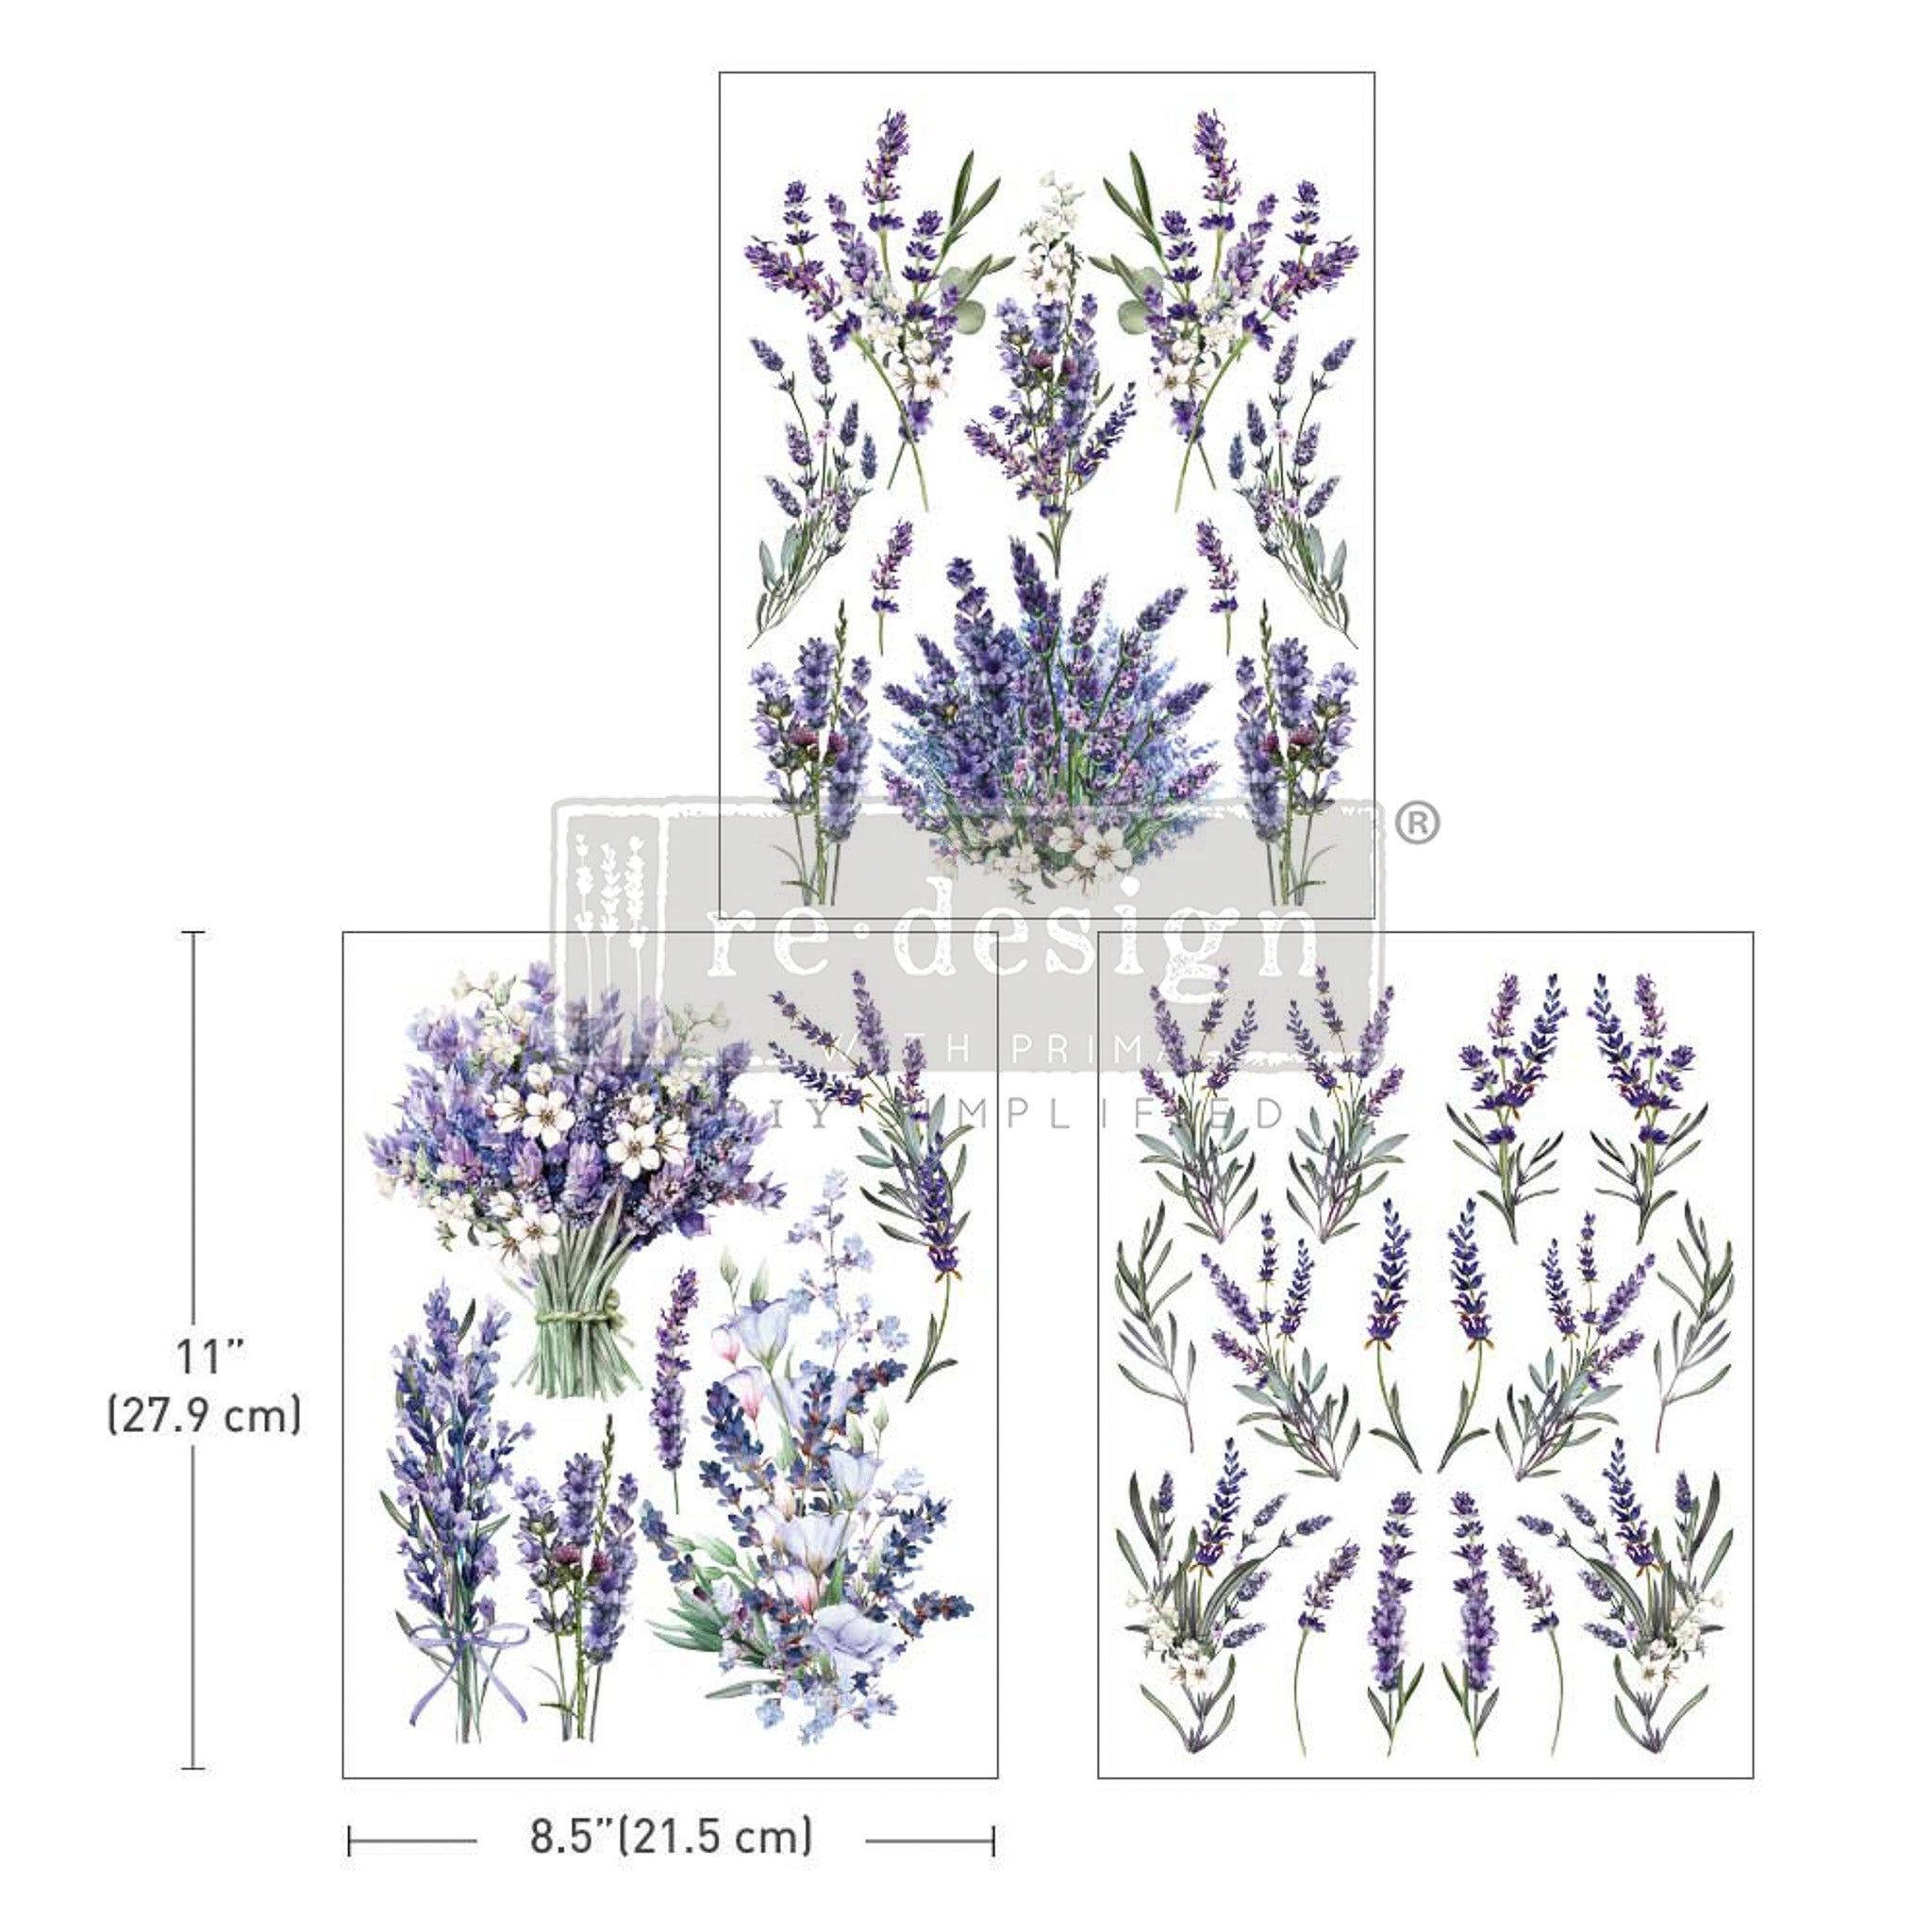 Three sheets of ReDesign with Prima's Lavender Bunch small transfer are against a white background. Measurements for 1 sheet reads: 11" [27.9 cm] by 8.5" [21.5 cm].